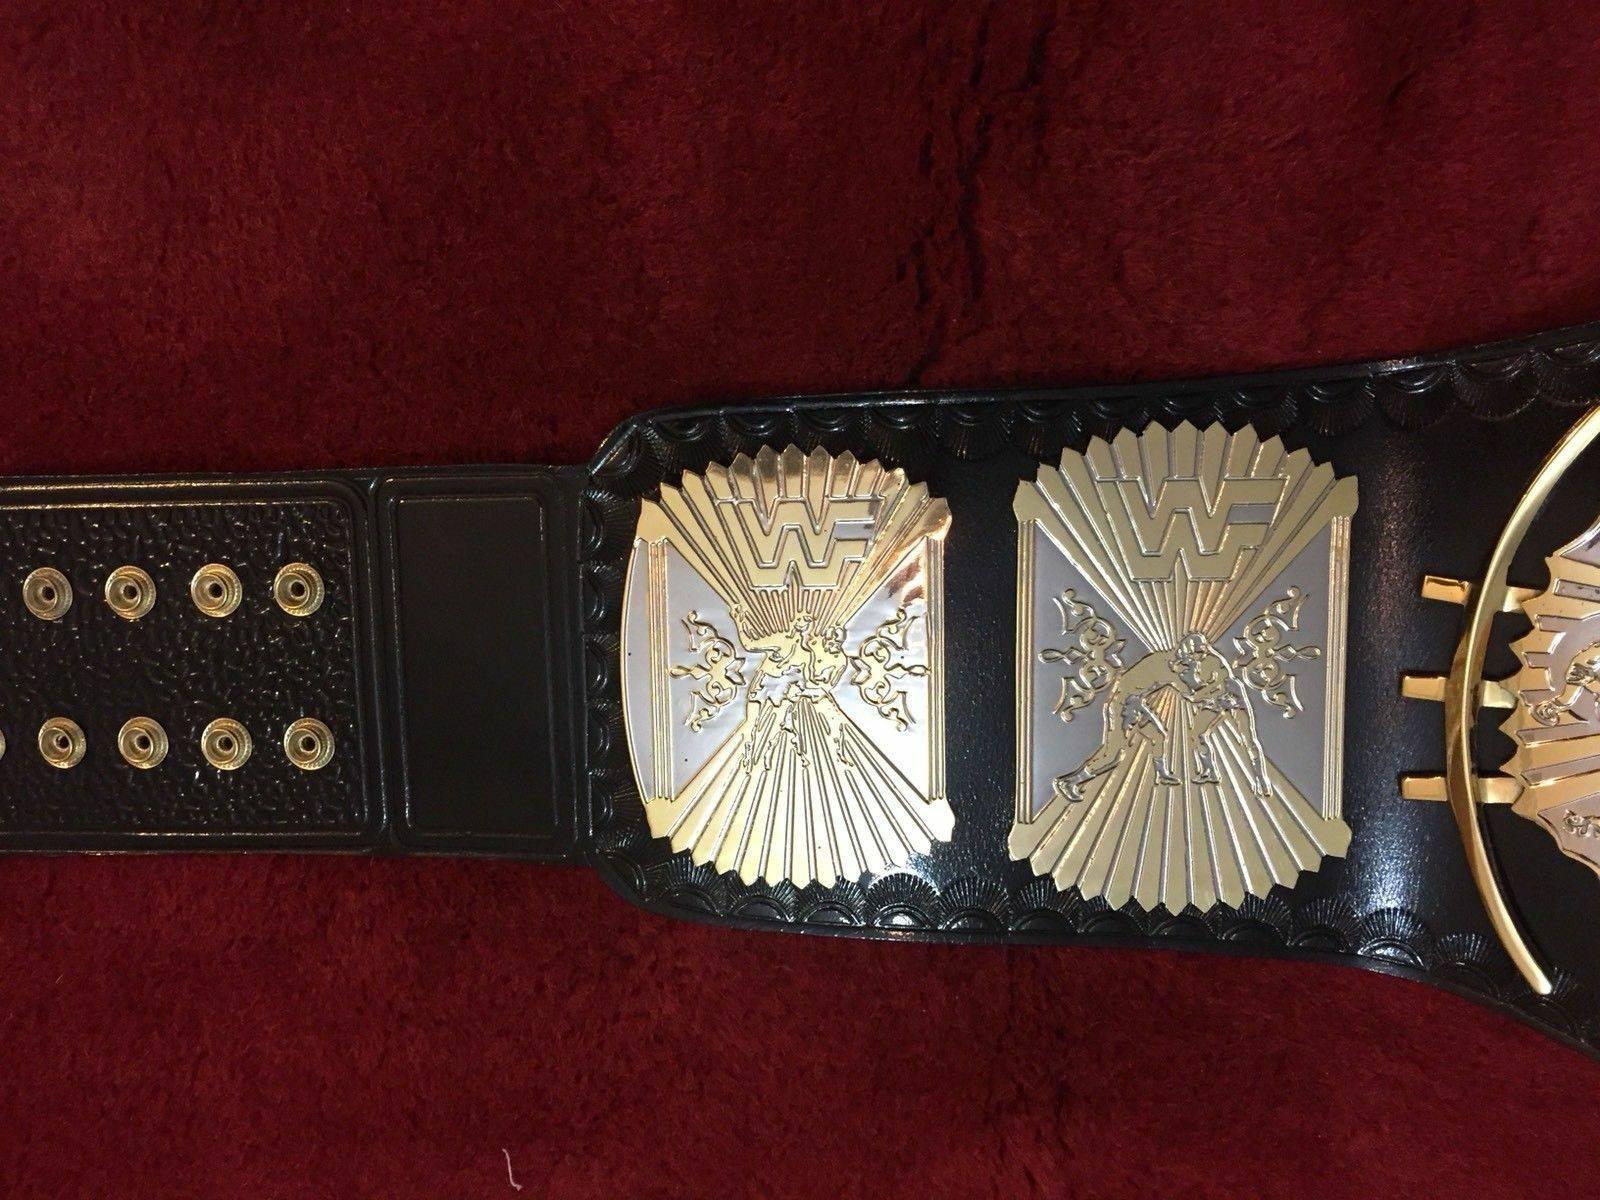 WWF WINGED EAGLE DUAL PLATED Brass Championship Belt - Zees Belts